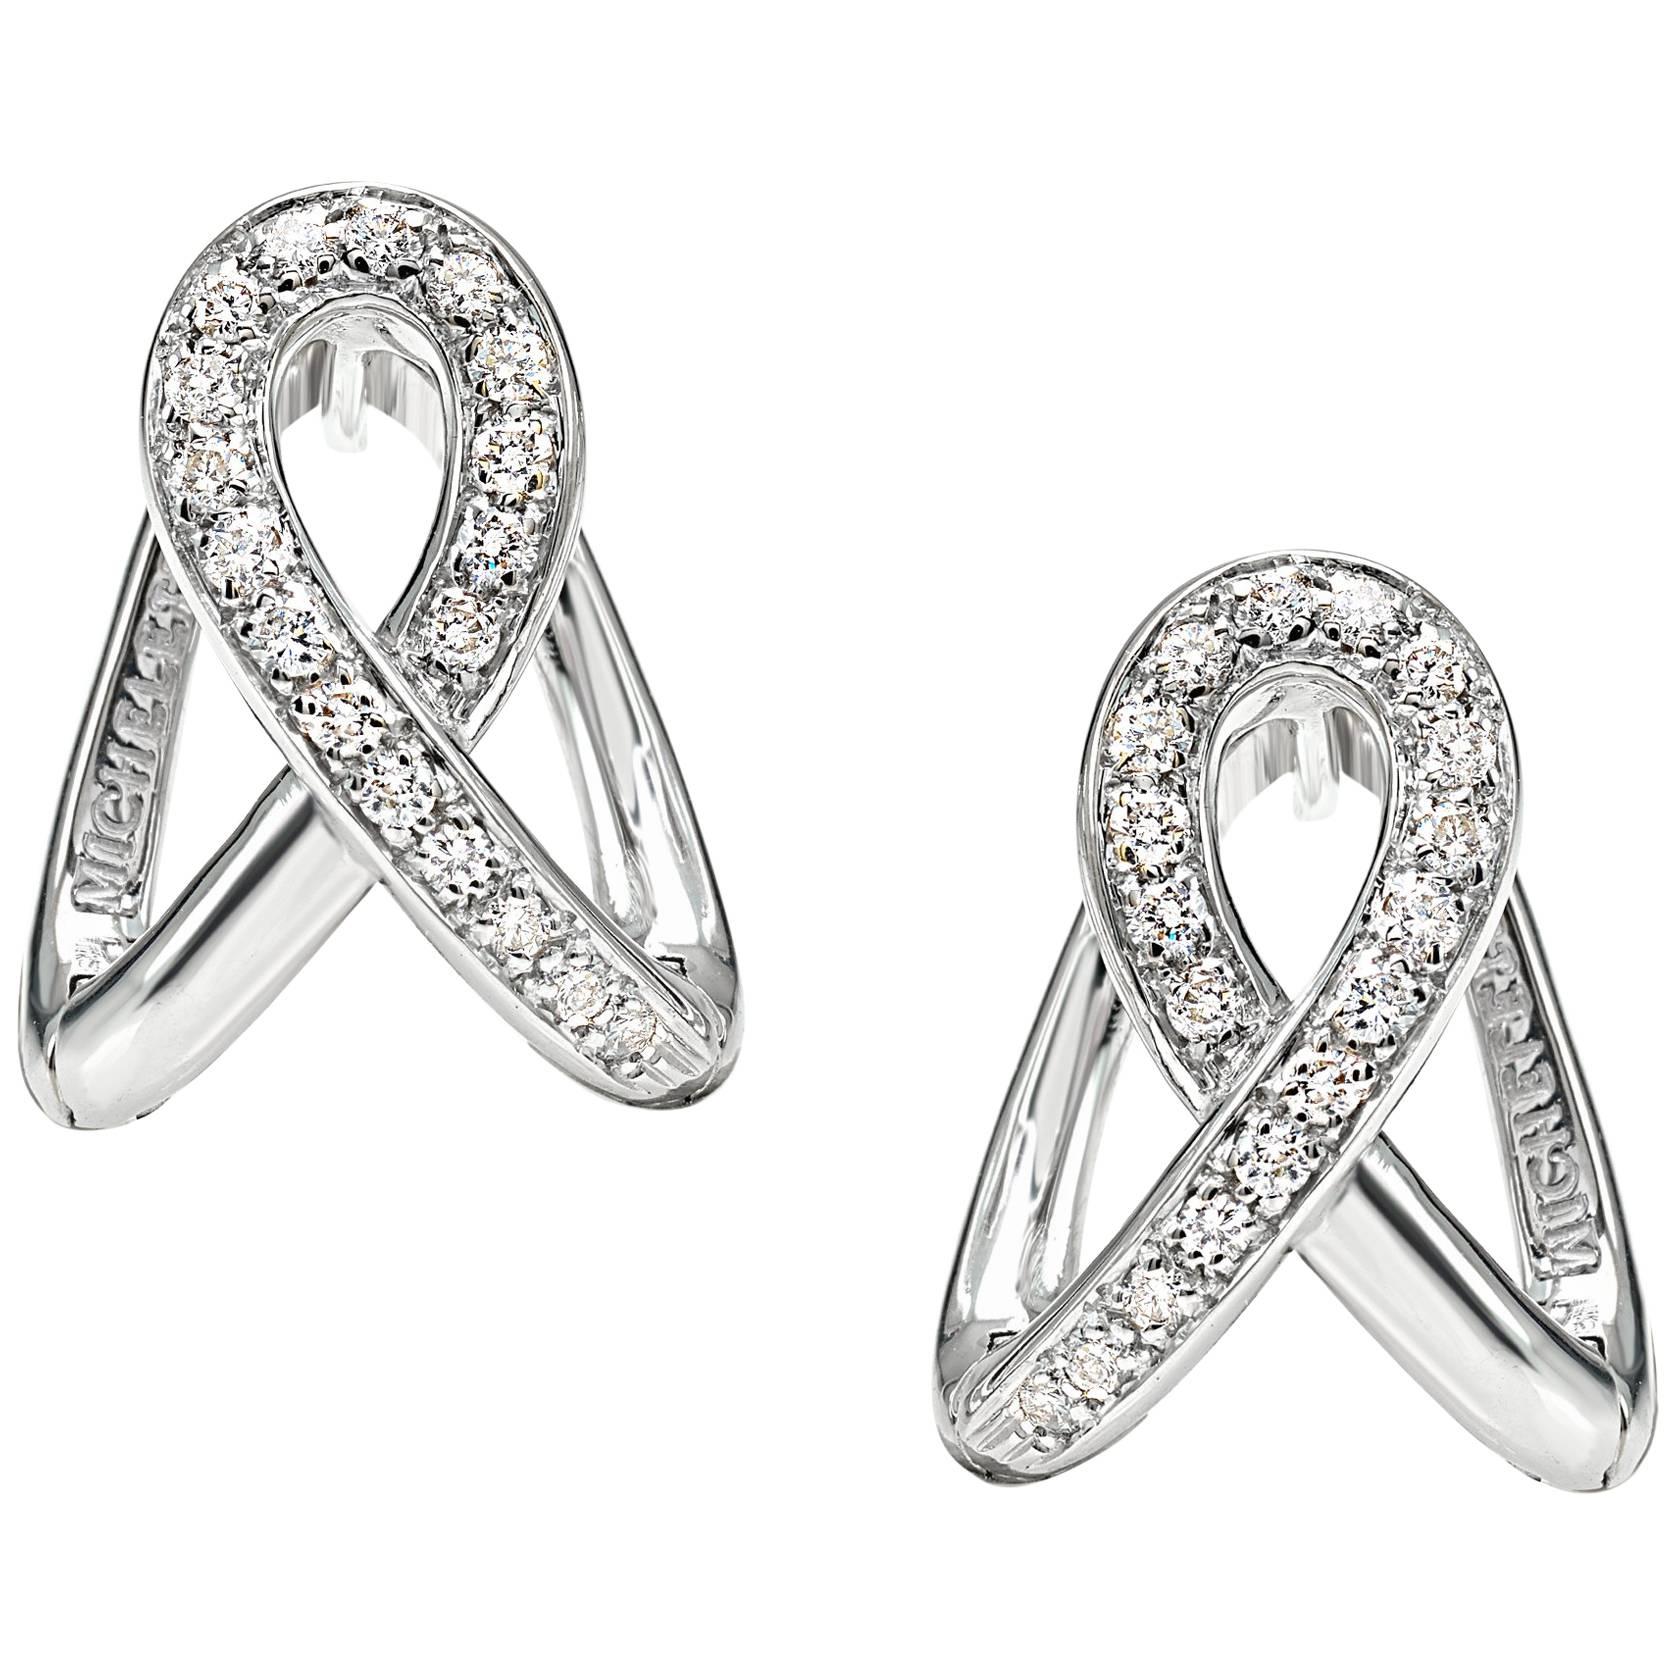 Earrings from the Collection "Essence" 18 Karat White Gold and Diamonds For Sale